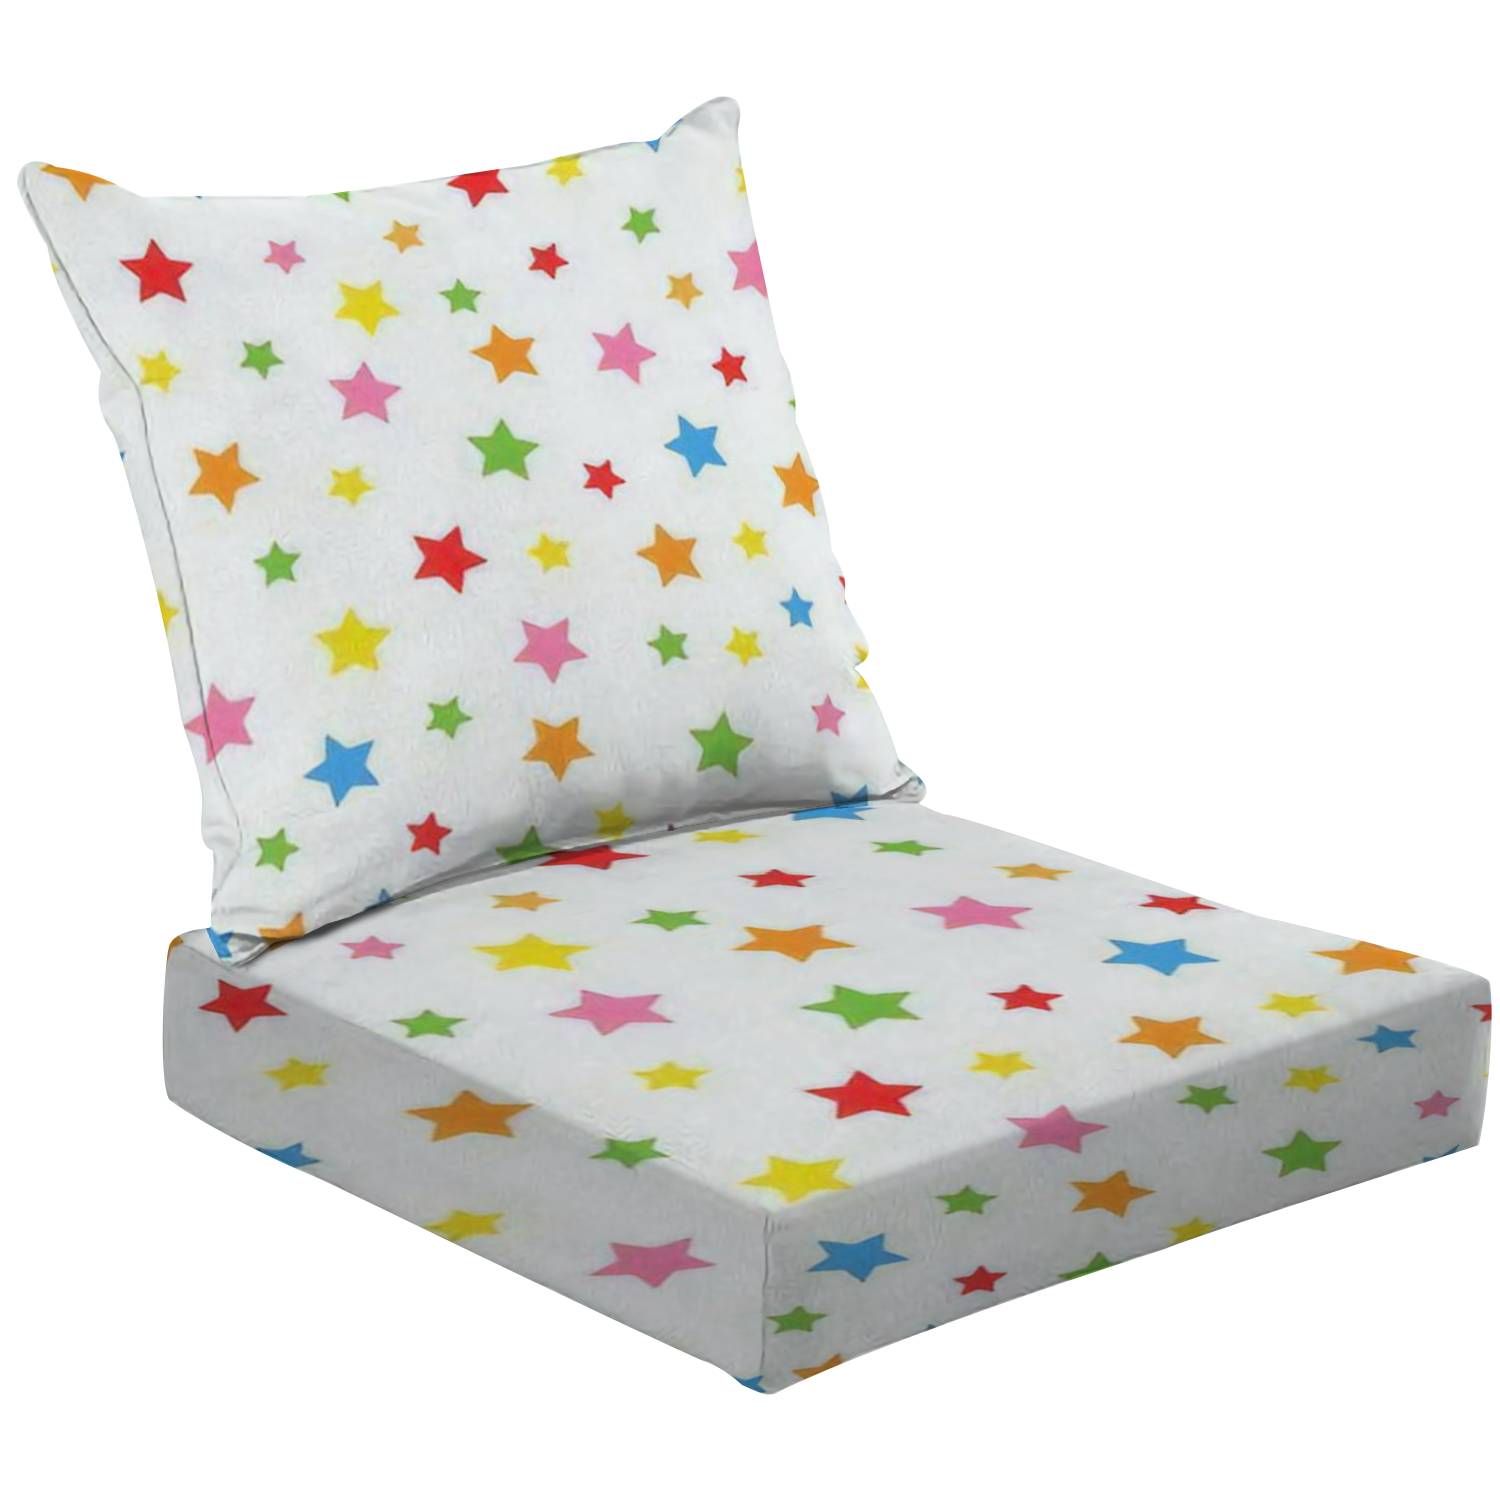 2-Piece Deep Seating Cushion Set A simple star White colored stars The print is well suited for Outdoor Chair Solid Rectangle Patio Cushion Set - image 1 of 1